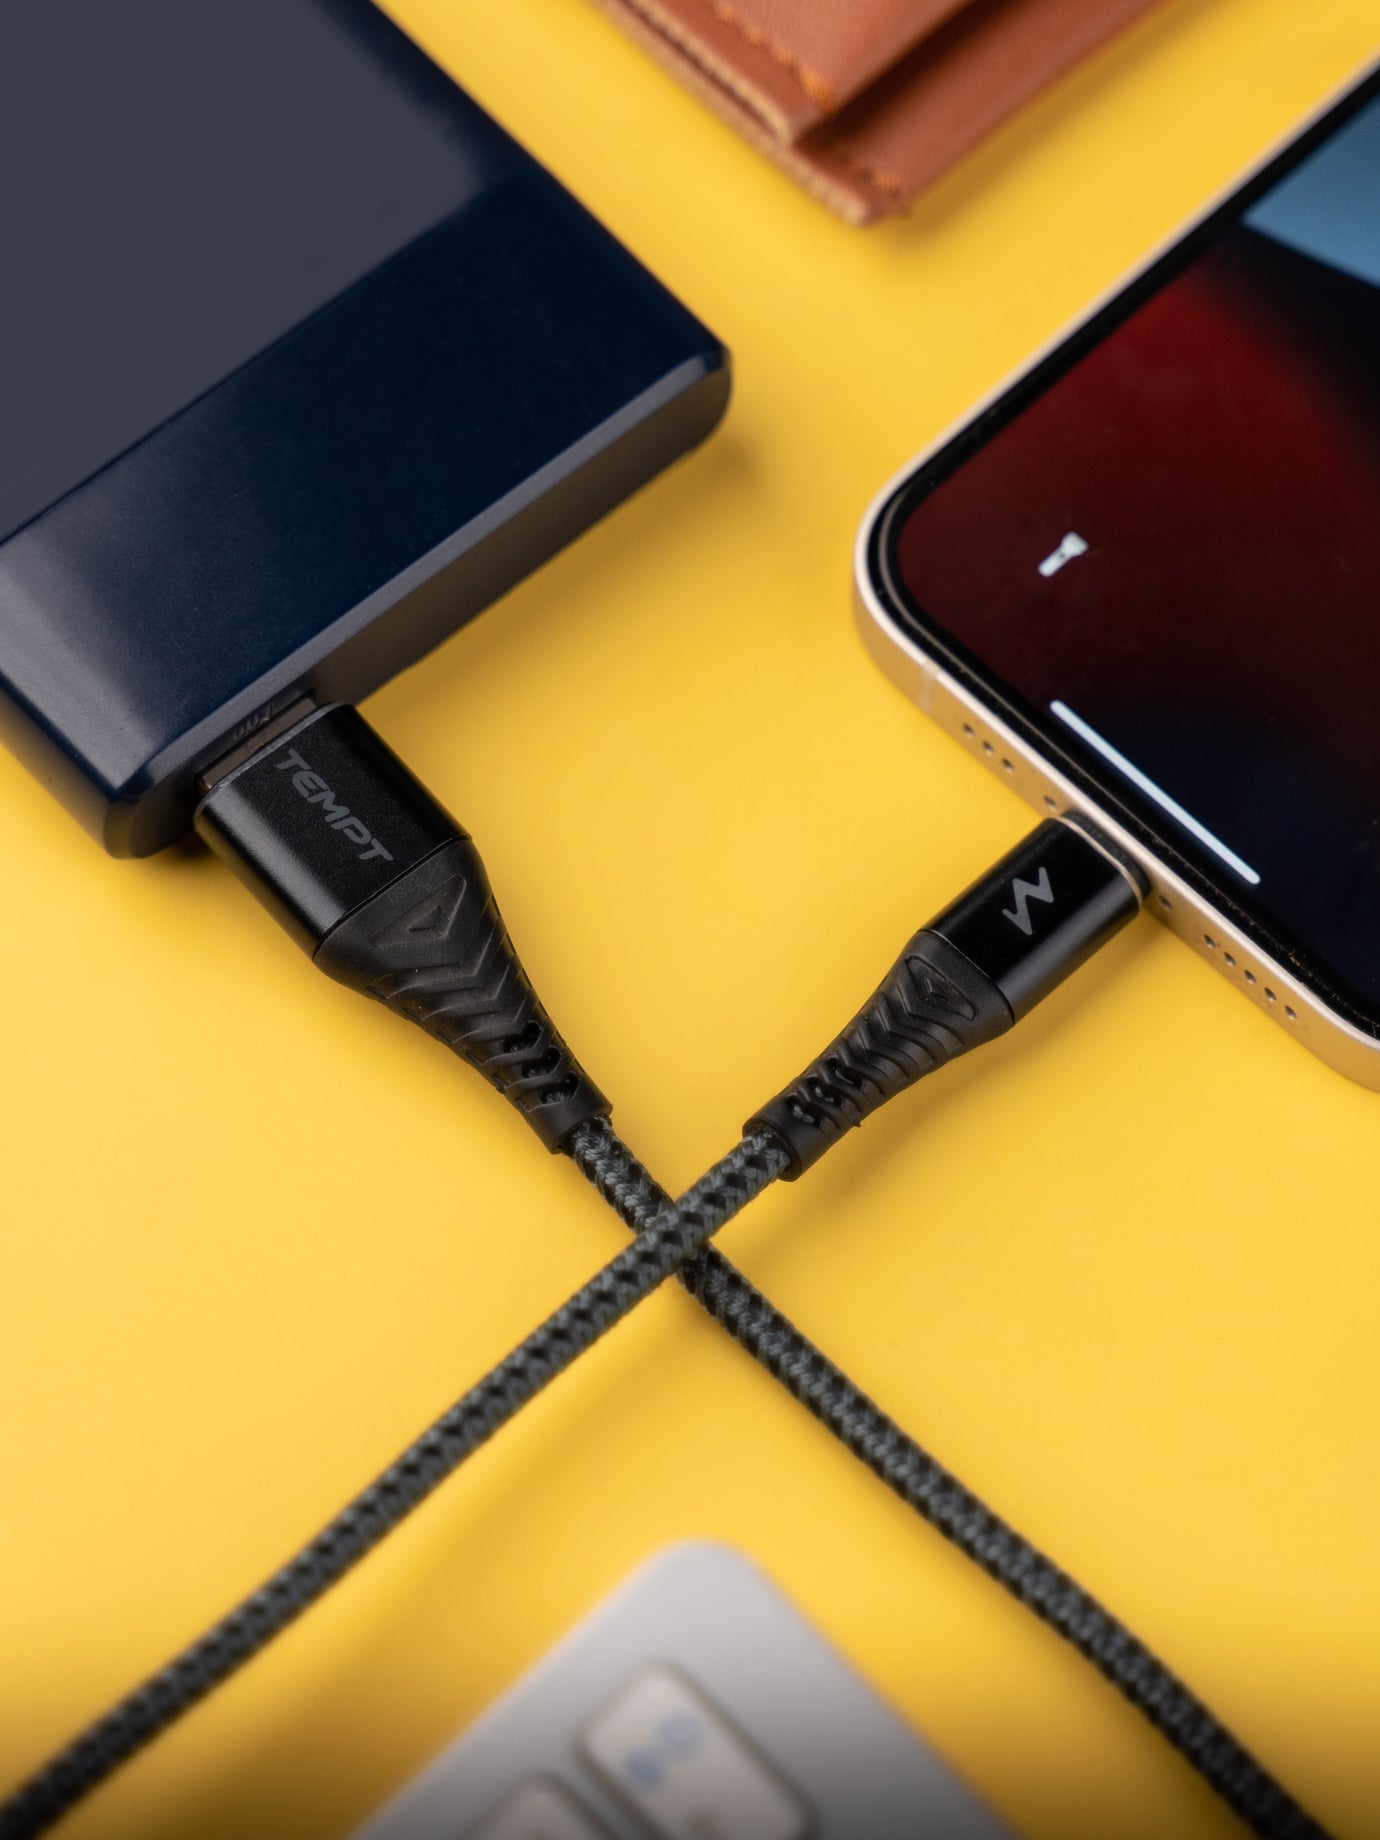 The Best Data Cable for Mobile